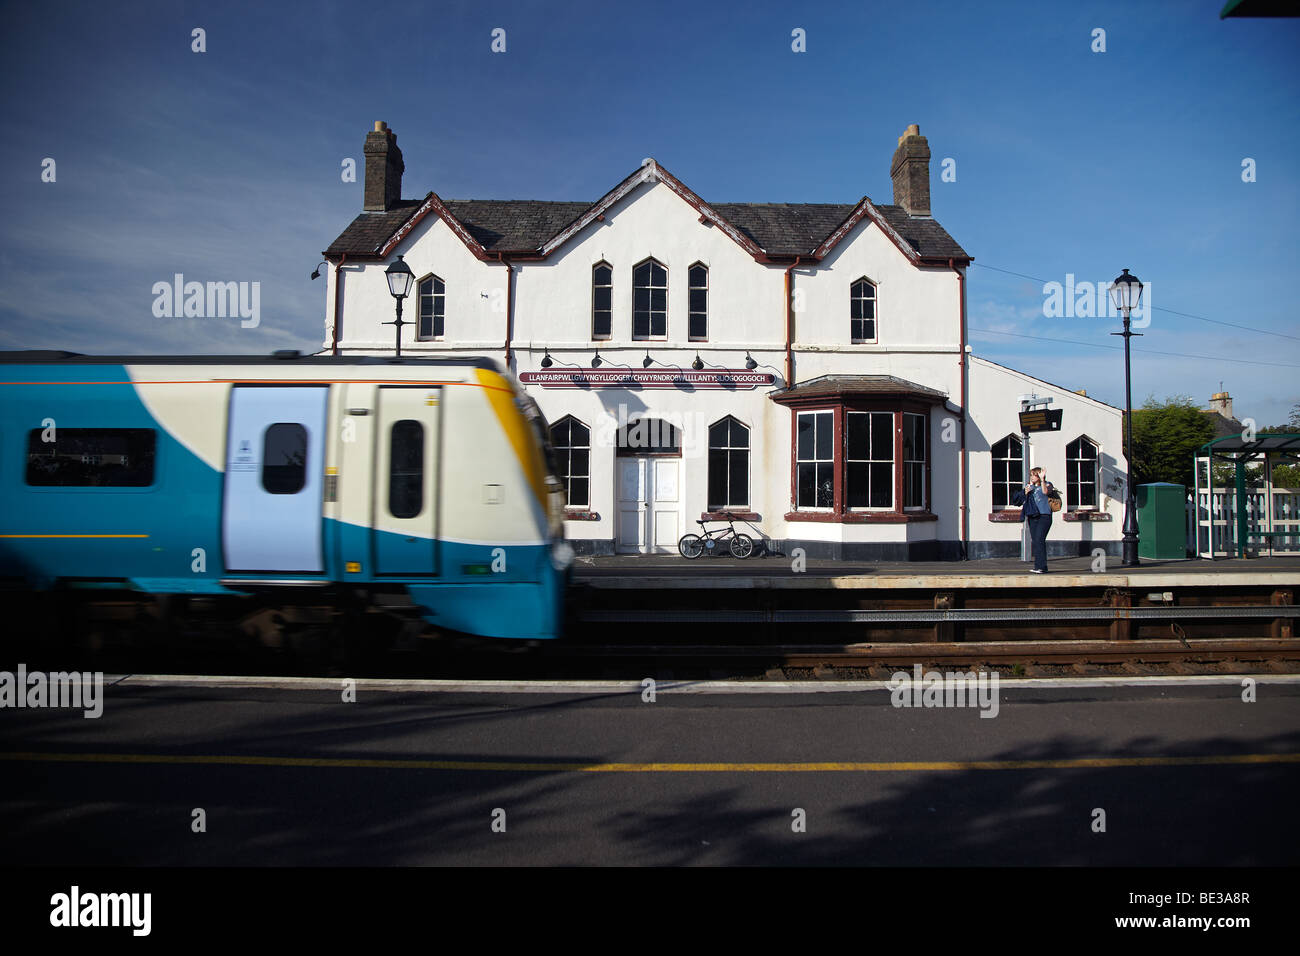 Llanfair PG Railway Station, Anglesey, North Wales, UK Stock Photo